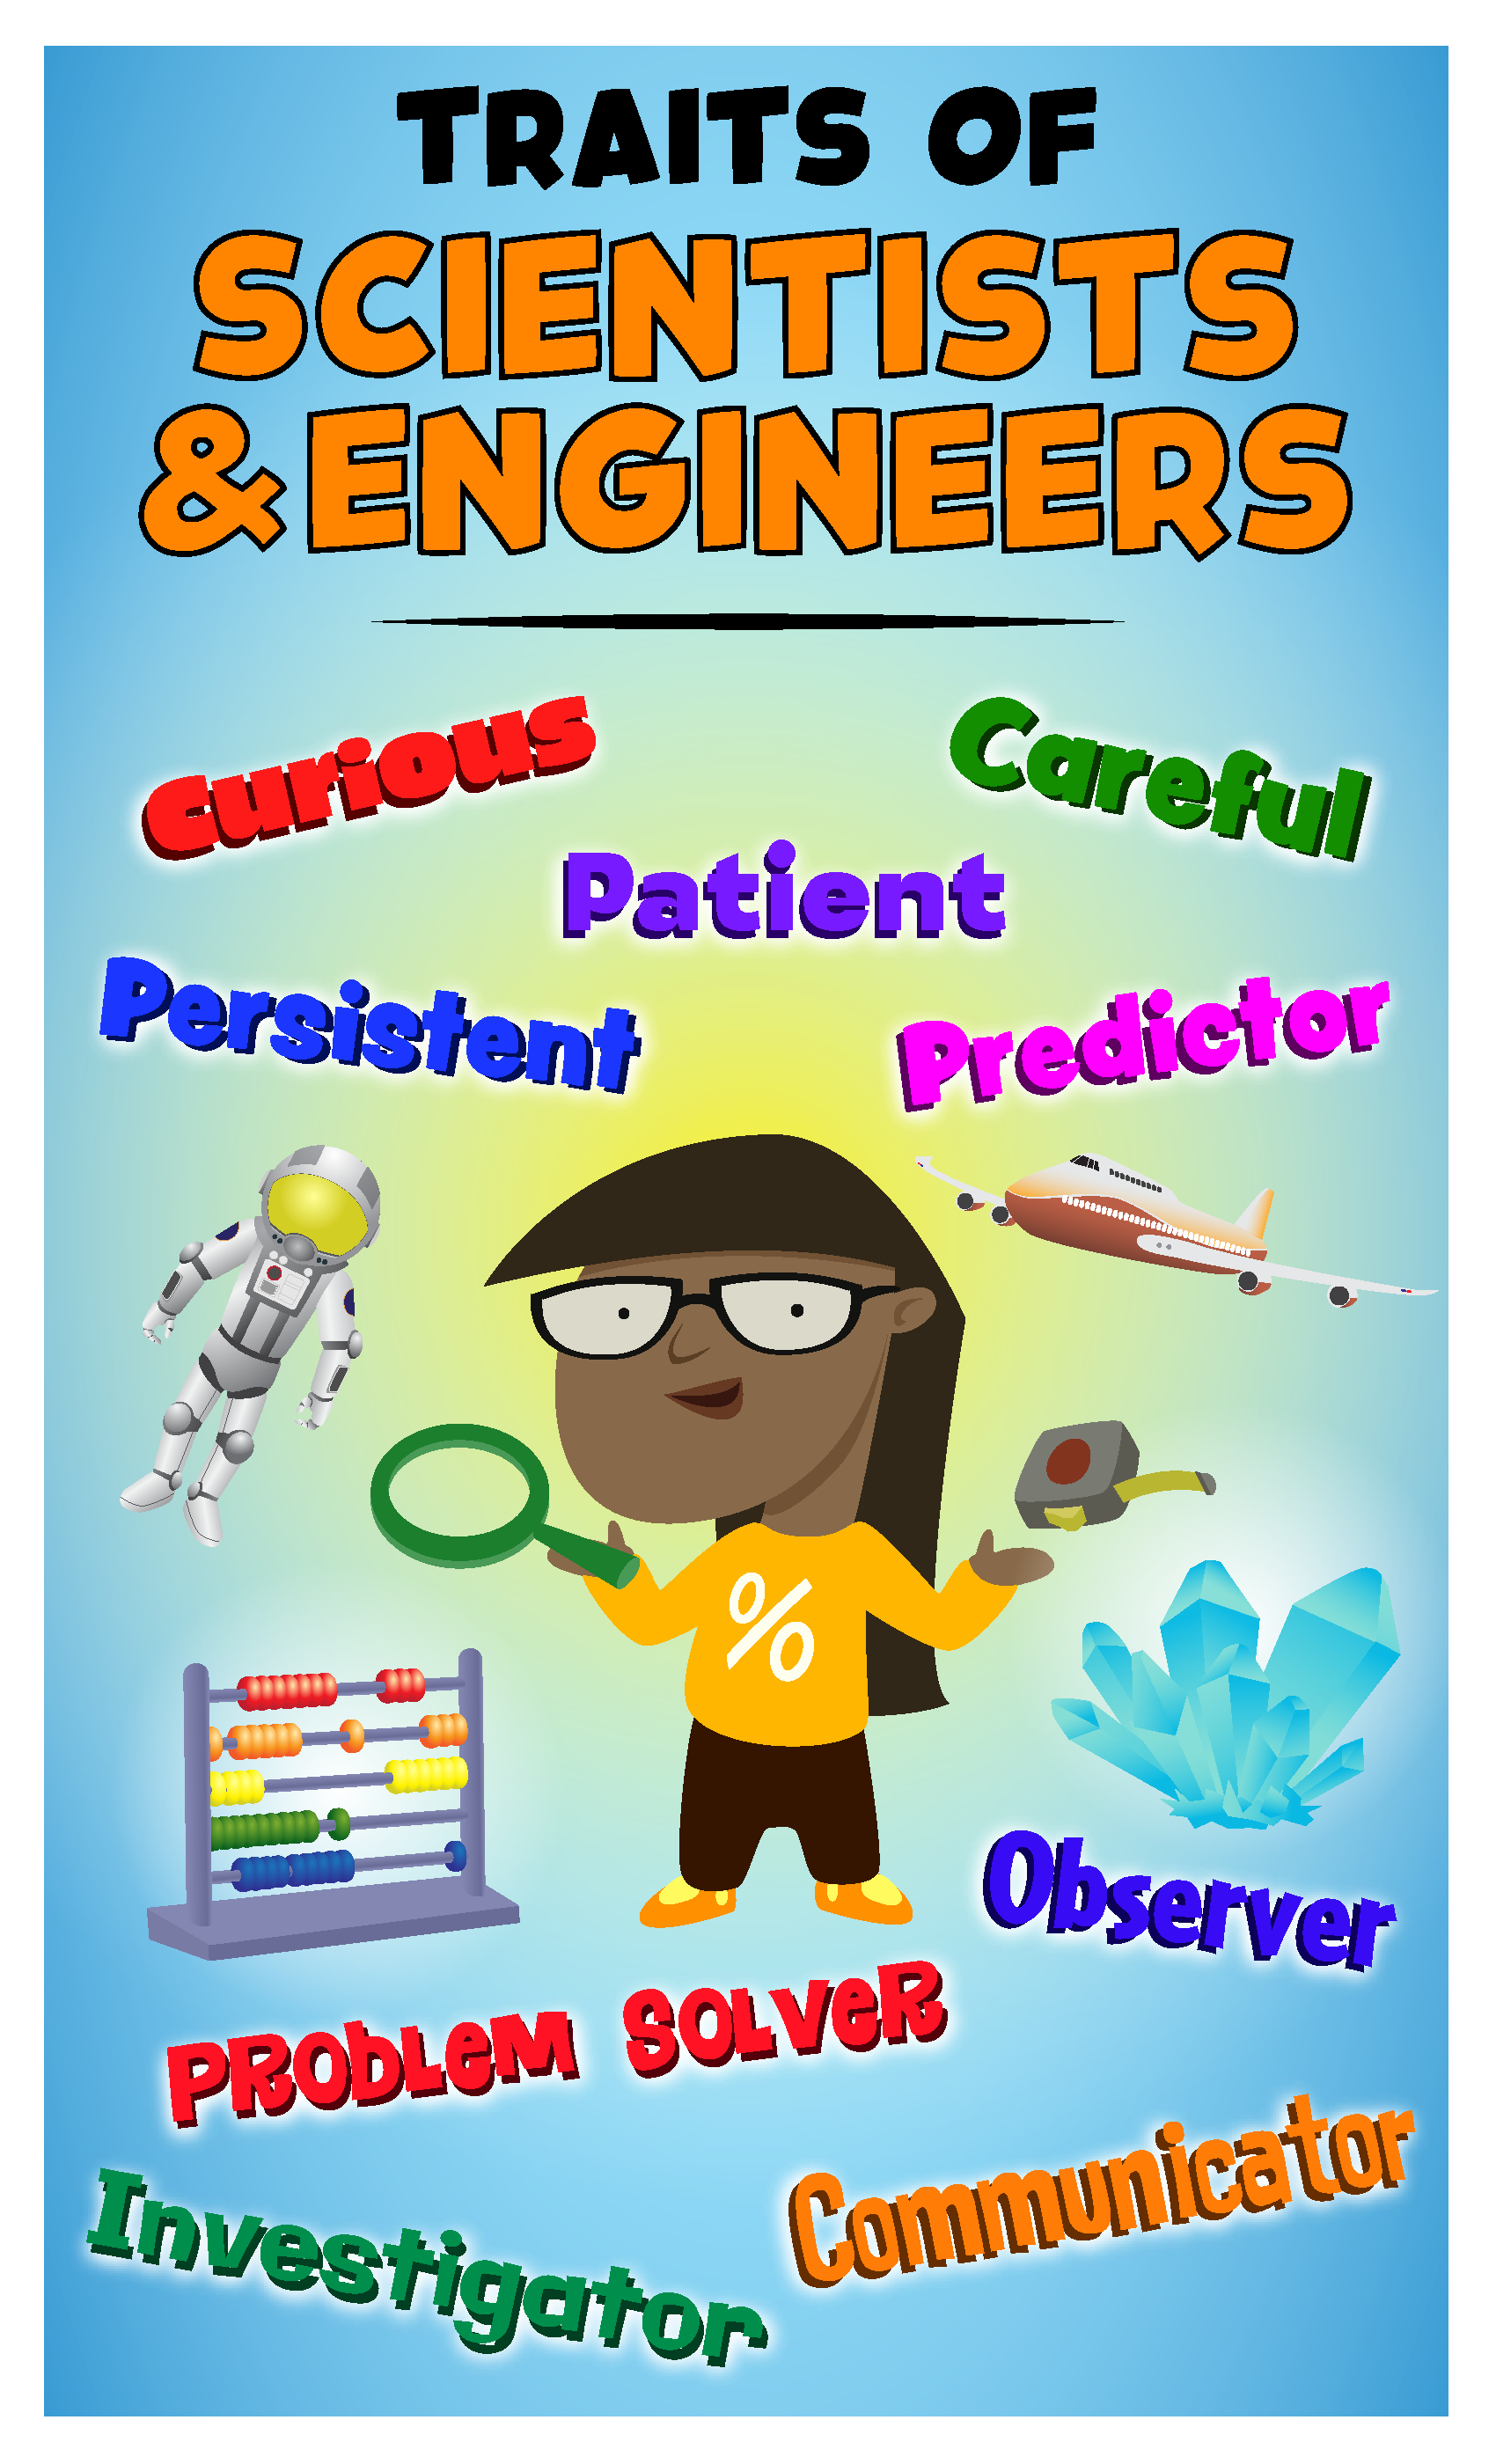 Poster showcasing traits of scientists and engineers